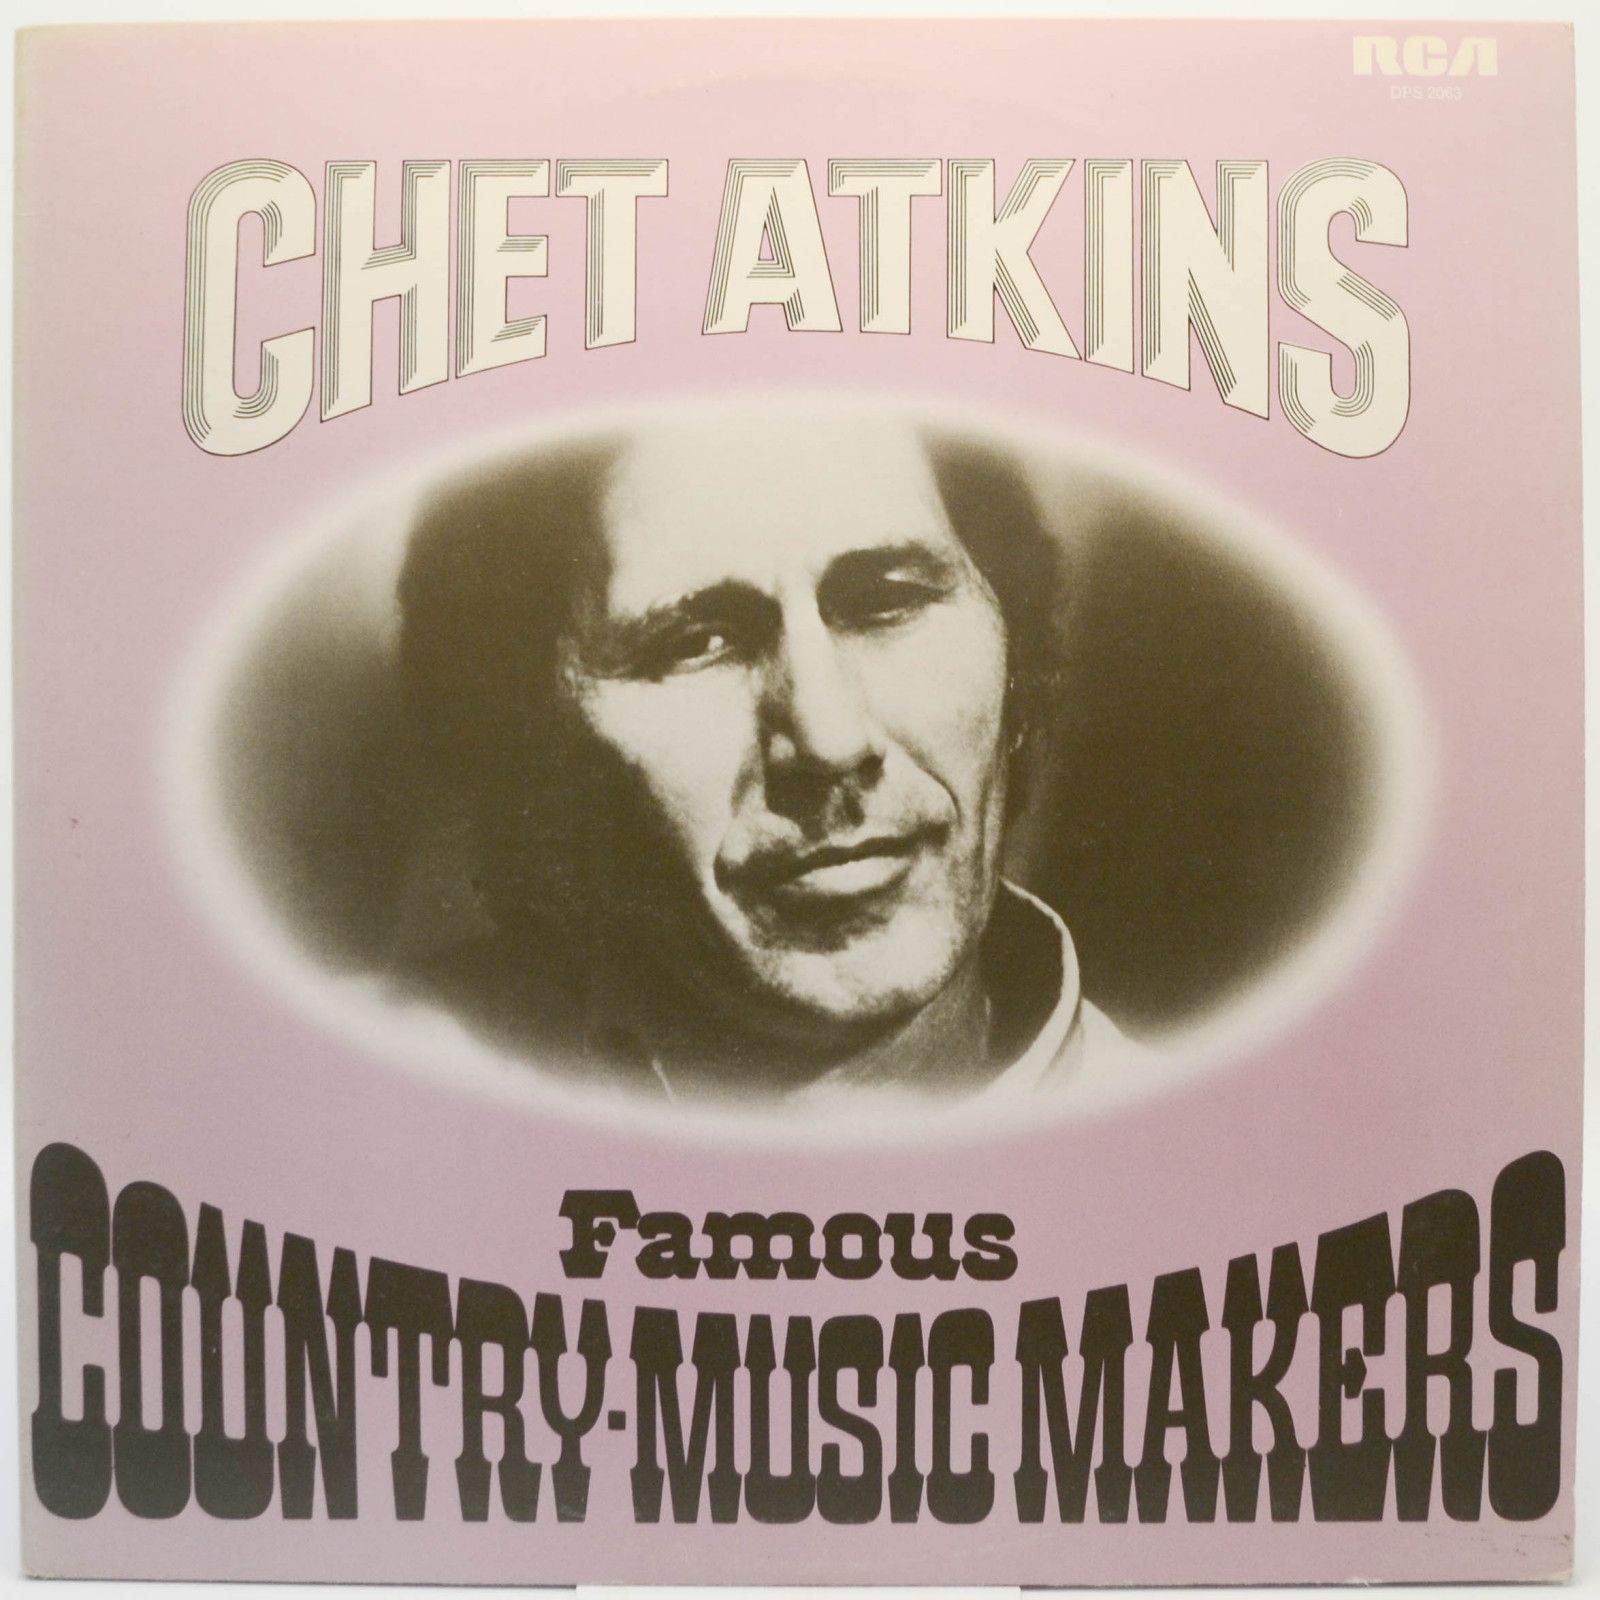 Chet Atkins — Famous Country-Music Makers (2LP, UK), 1975